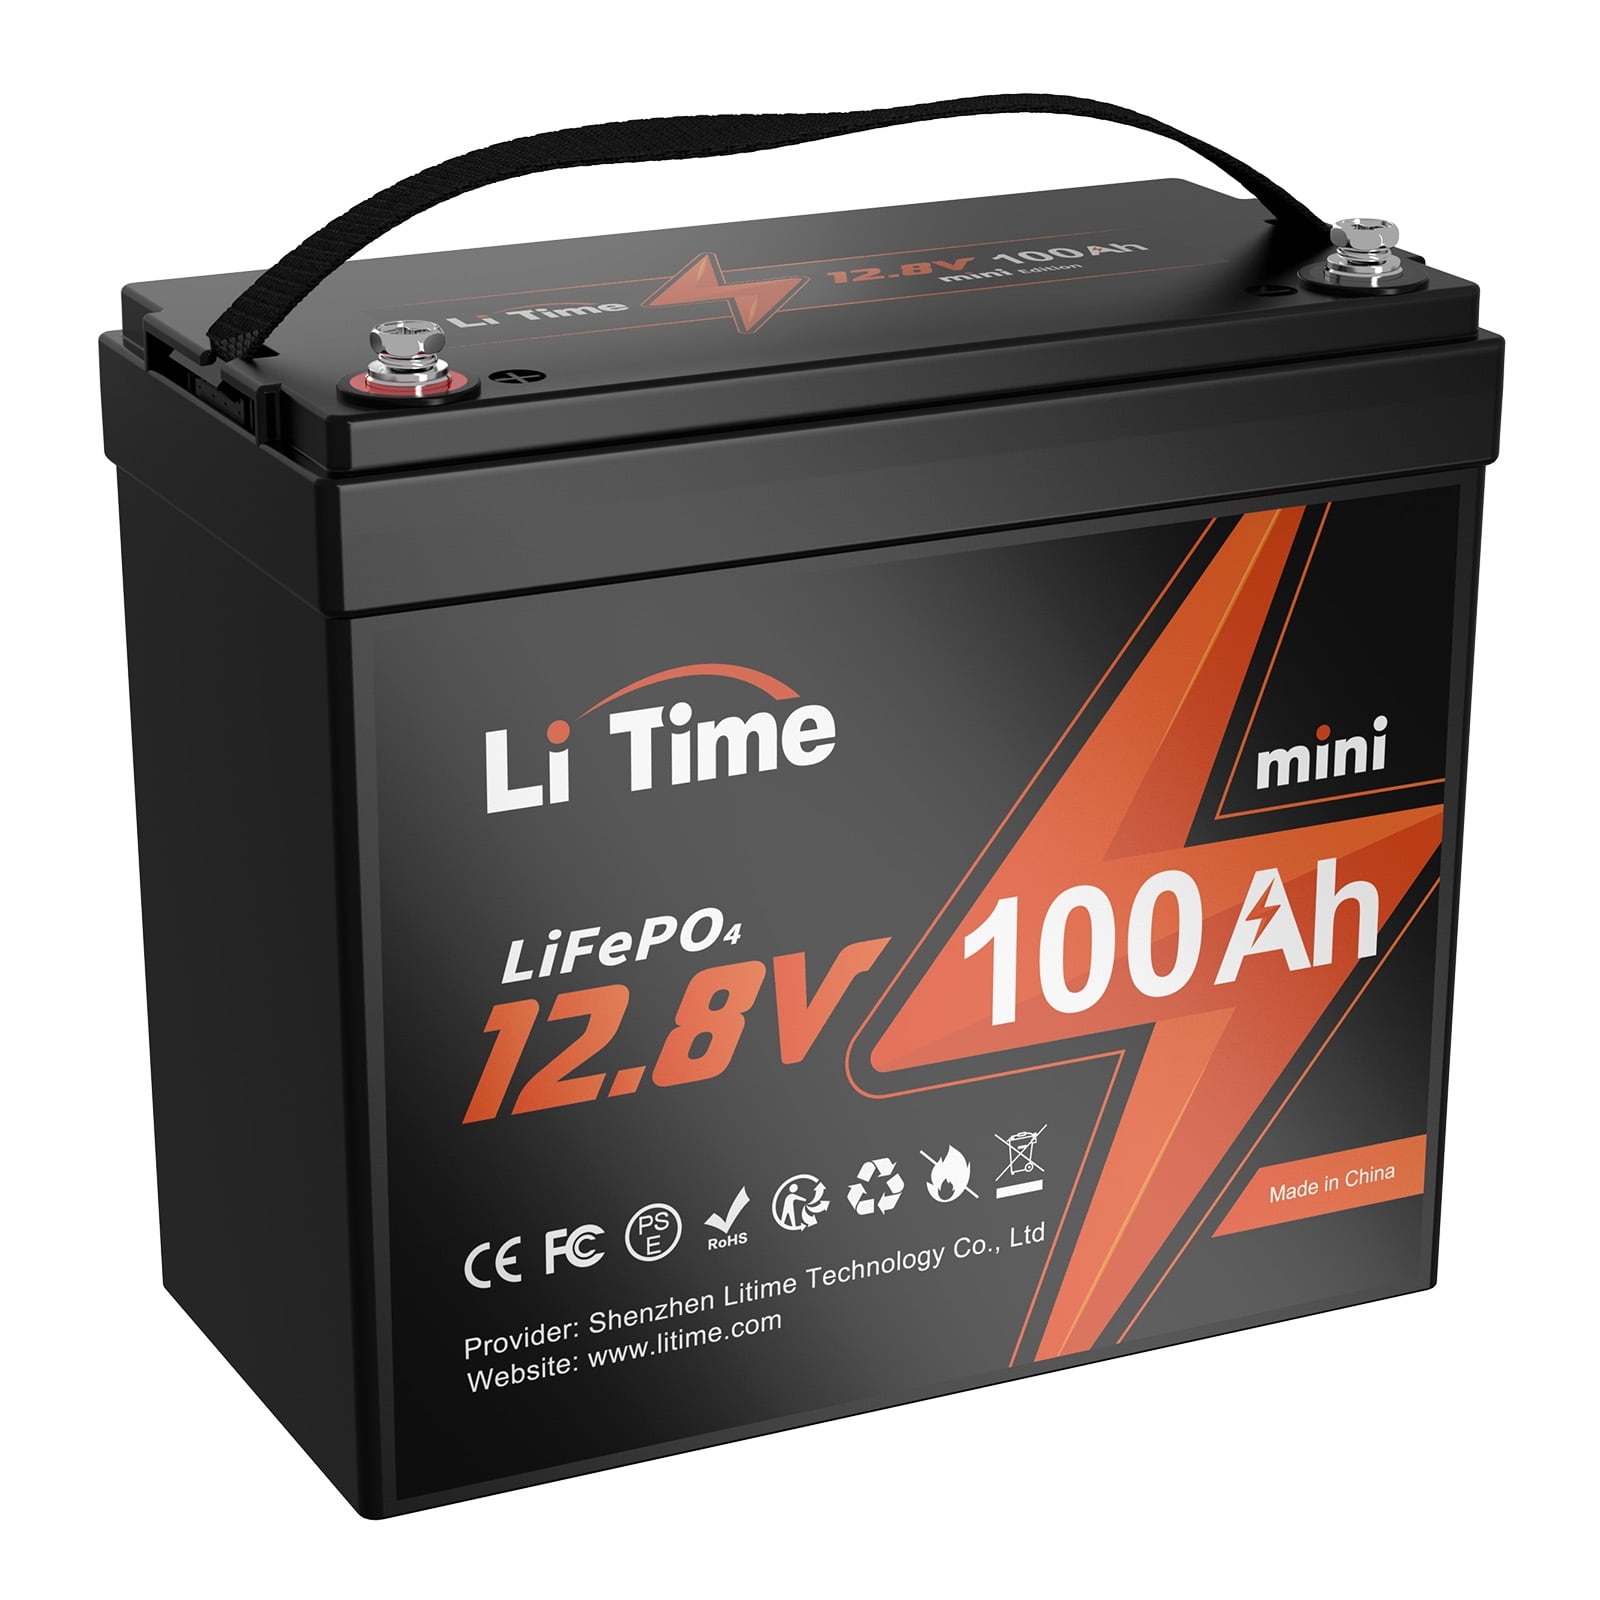 LiTime 24V 100Ah LiFePO4 Lithium Battery, Built-in 100A BMS, 4000+ Cycles  Rechargeable Battery, Max. 2560W Load Power, Perfect for RV/Camper, Solar,  Marine, Overland/Van, Off-Grid Applications… : Automotive 